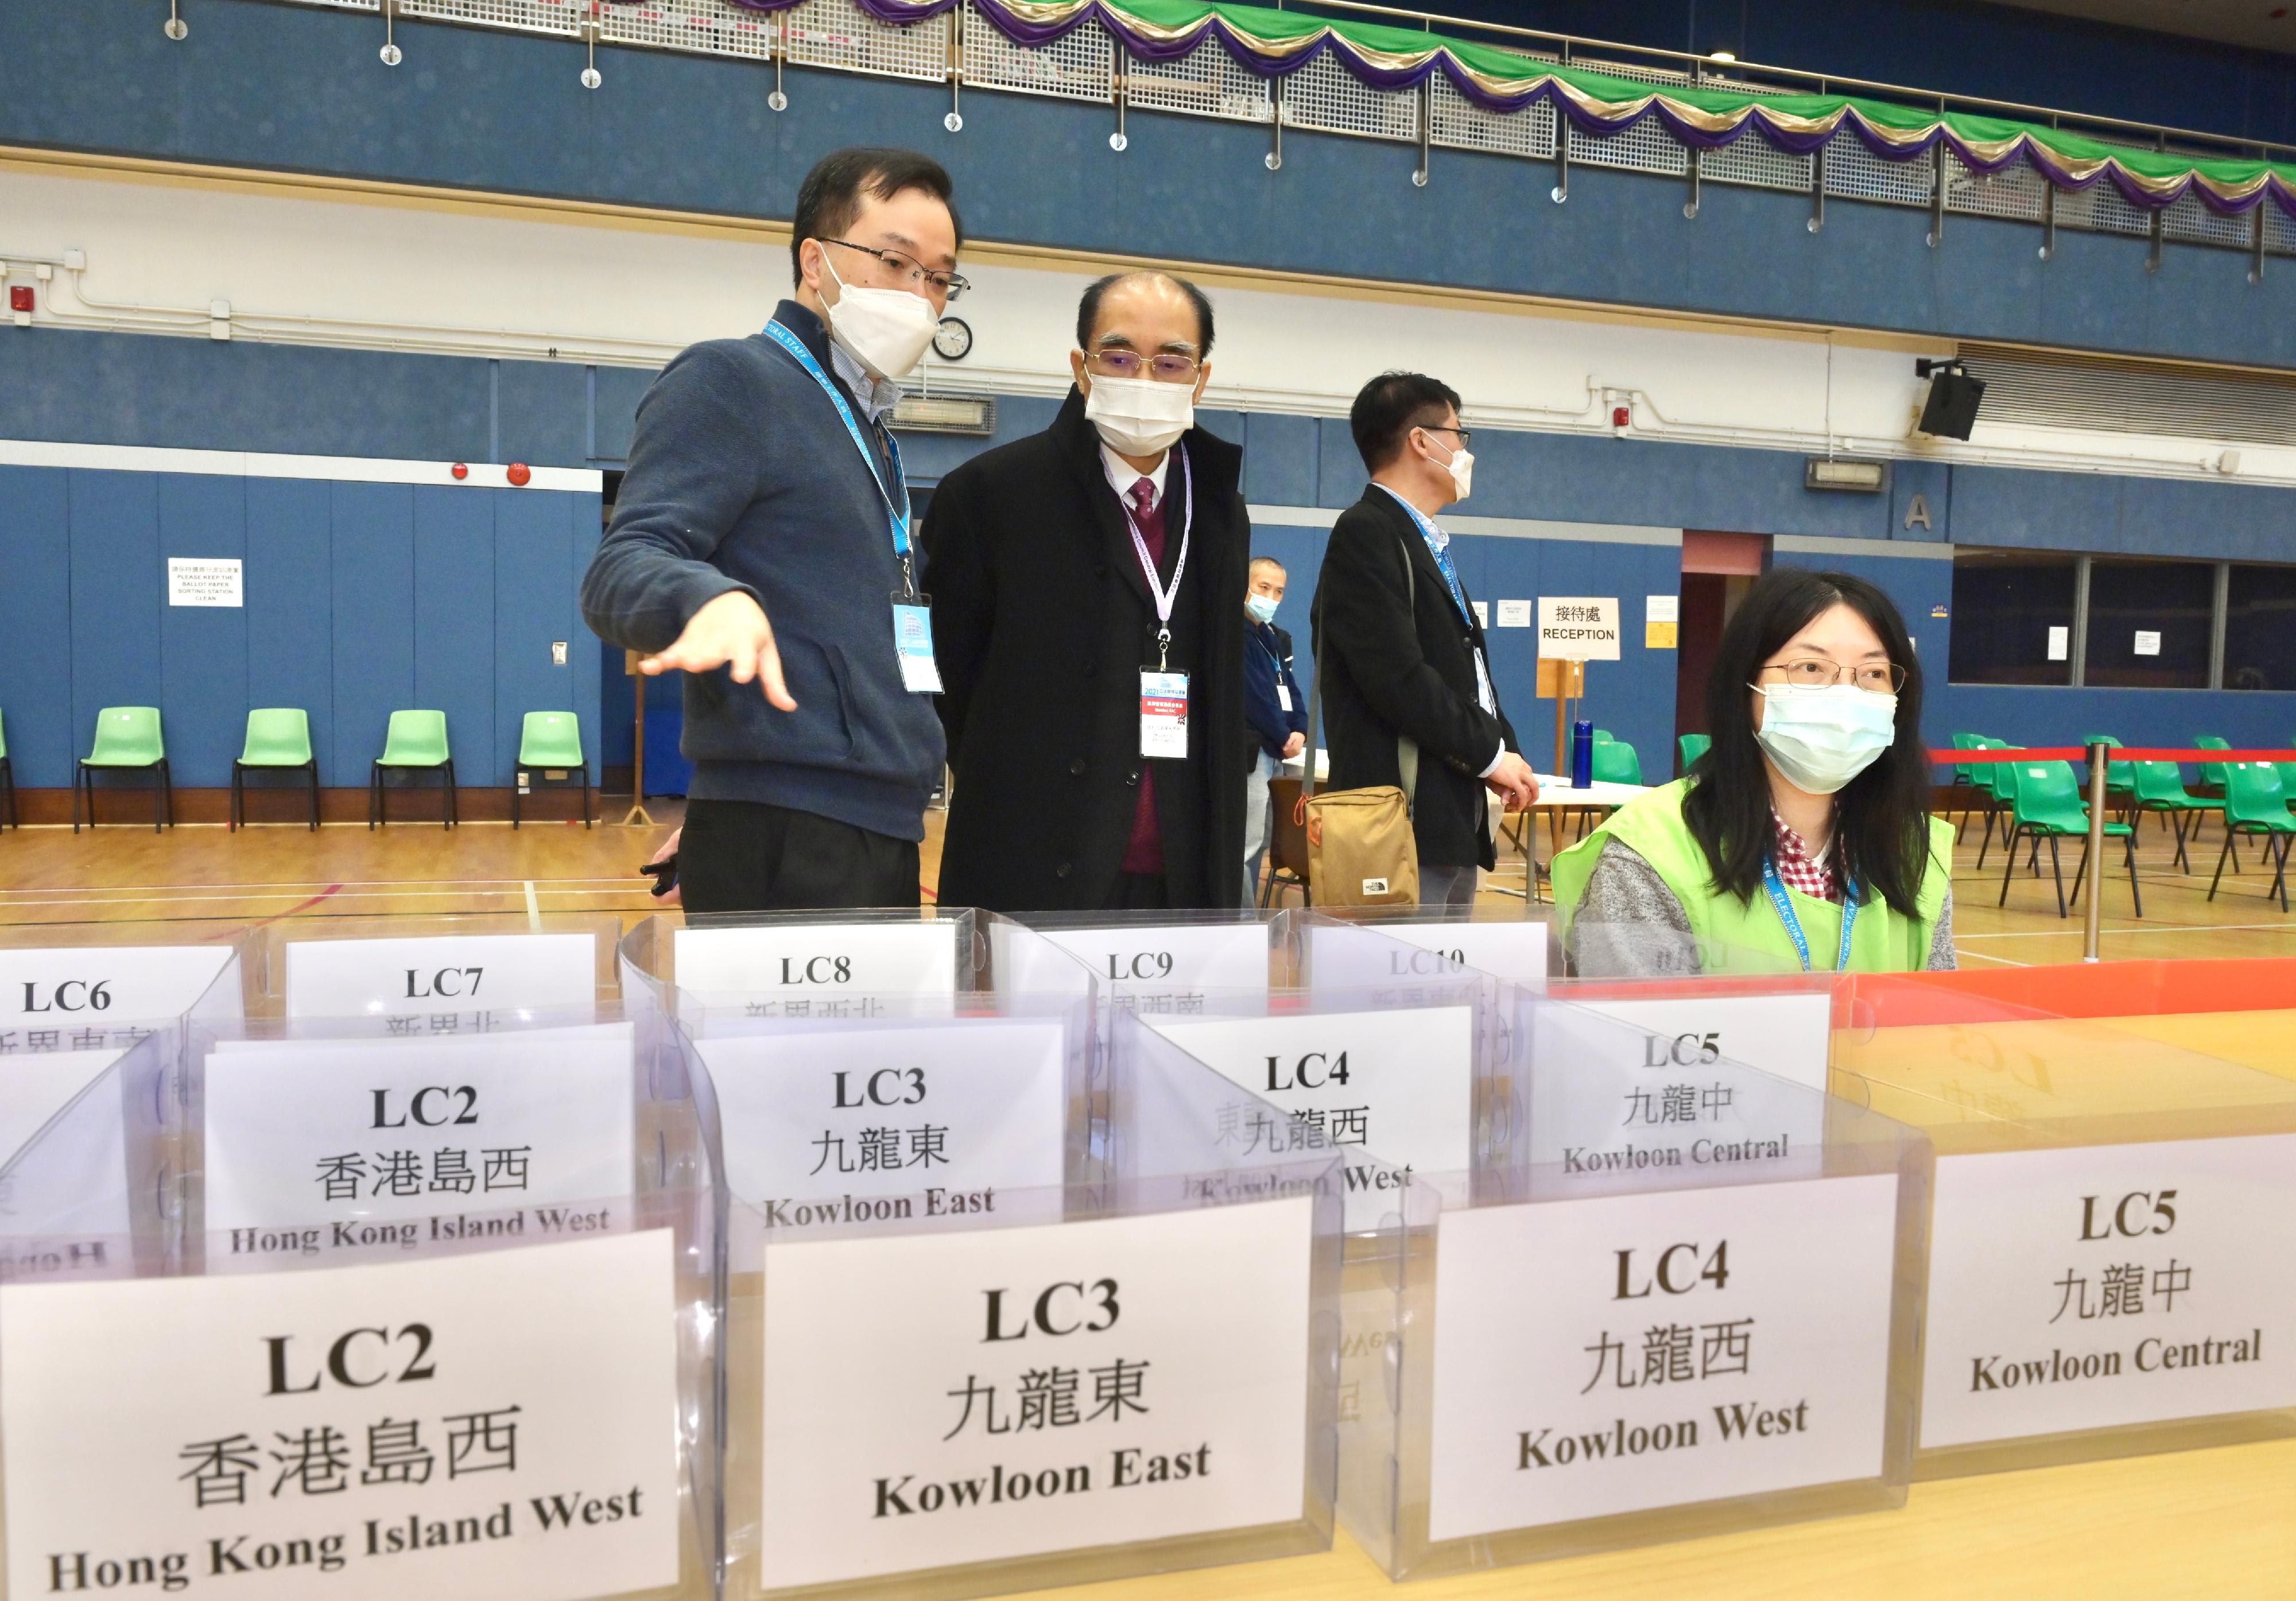 Electoral Affairs Commission member Mr Arthur Luk, SC (second left), today (December 19) visits the ballot paper sorting station of the 2021 Legislative Council General Election at Shun Lee Tsuen Sports Centre.